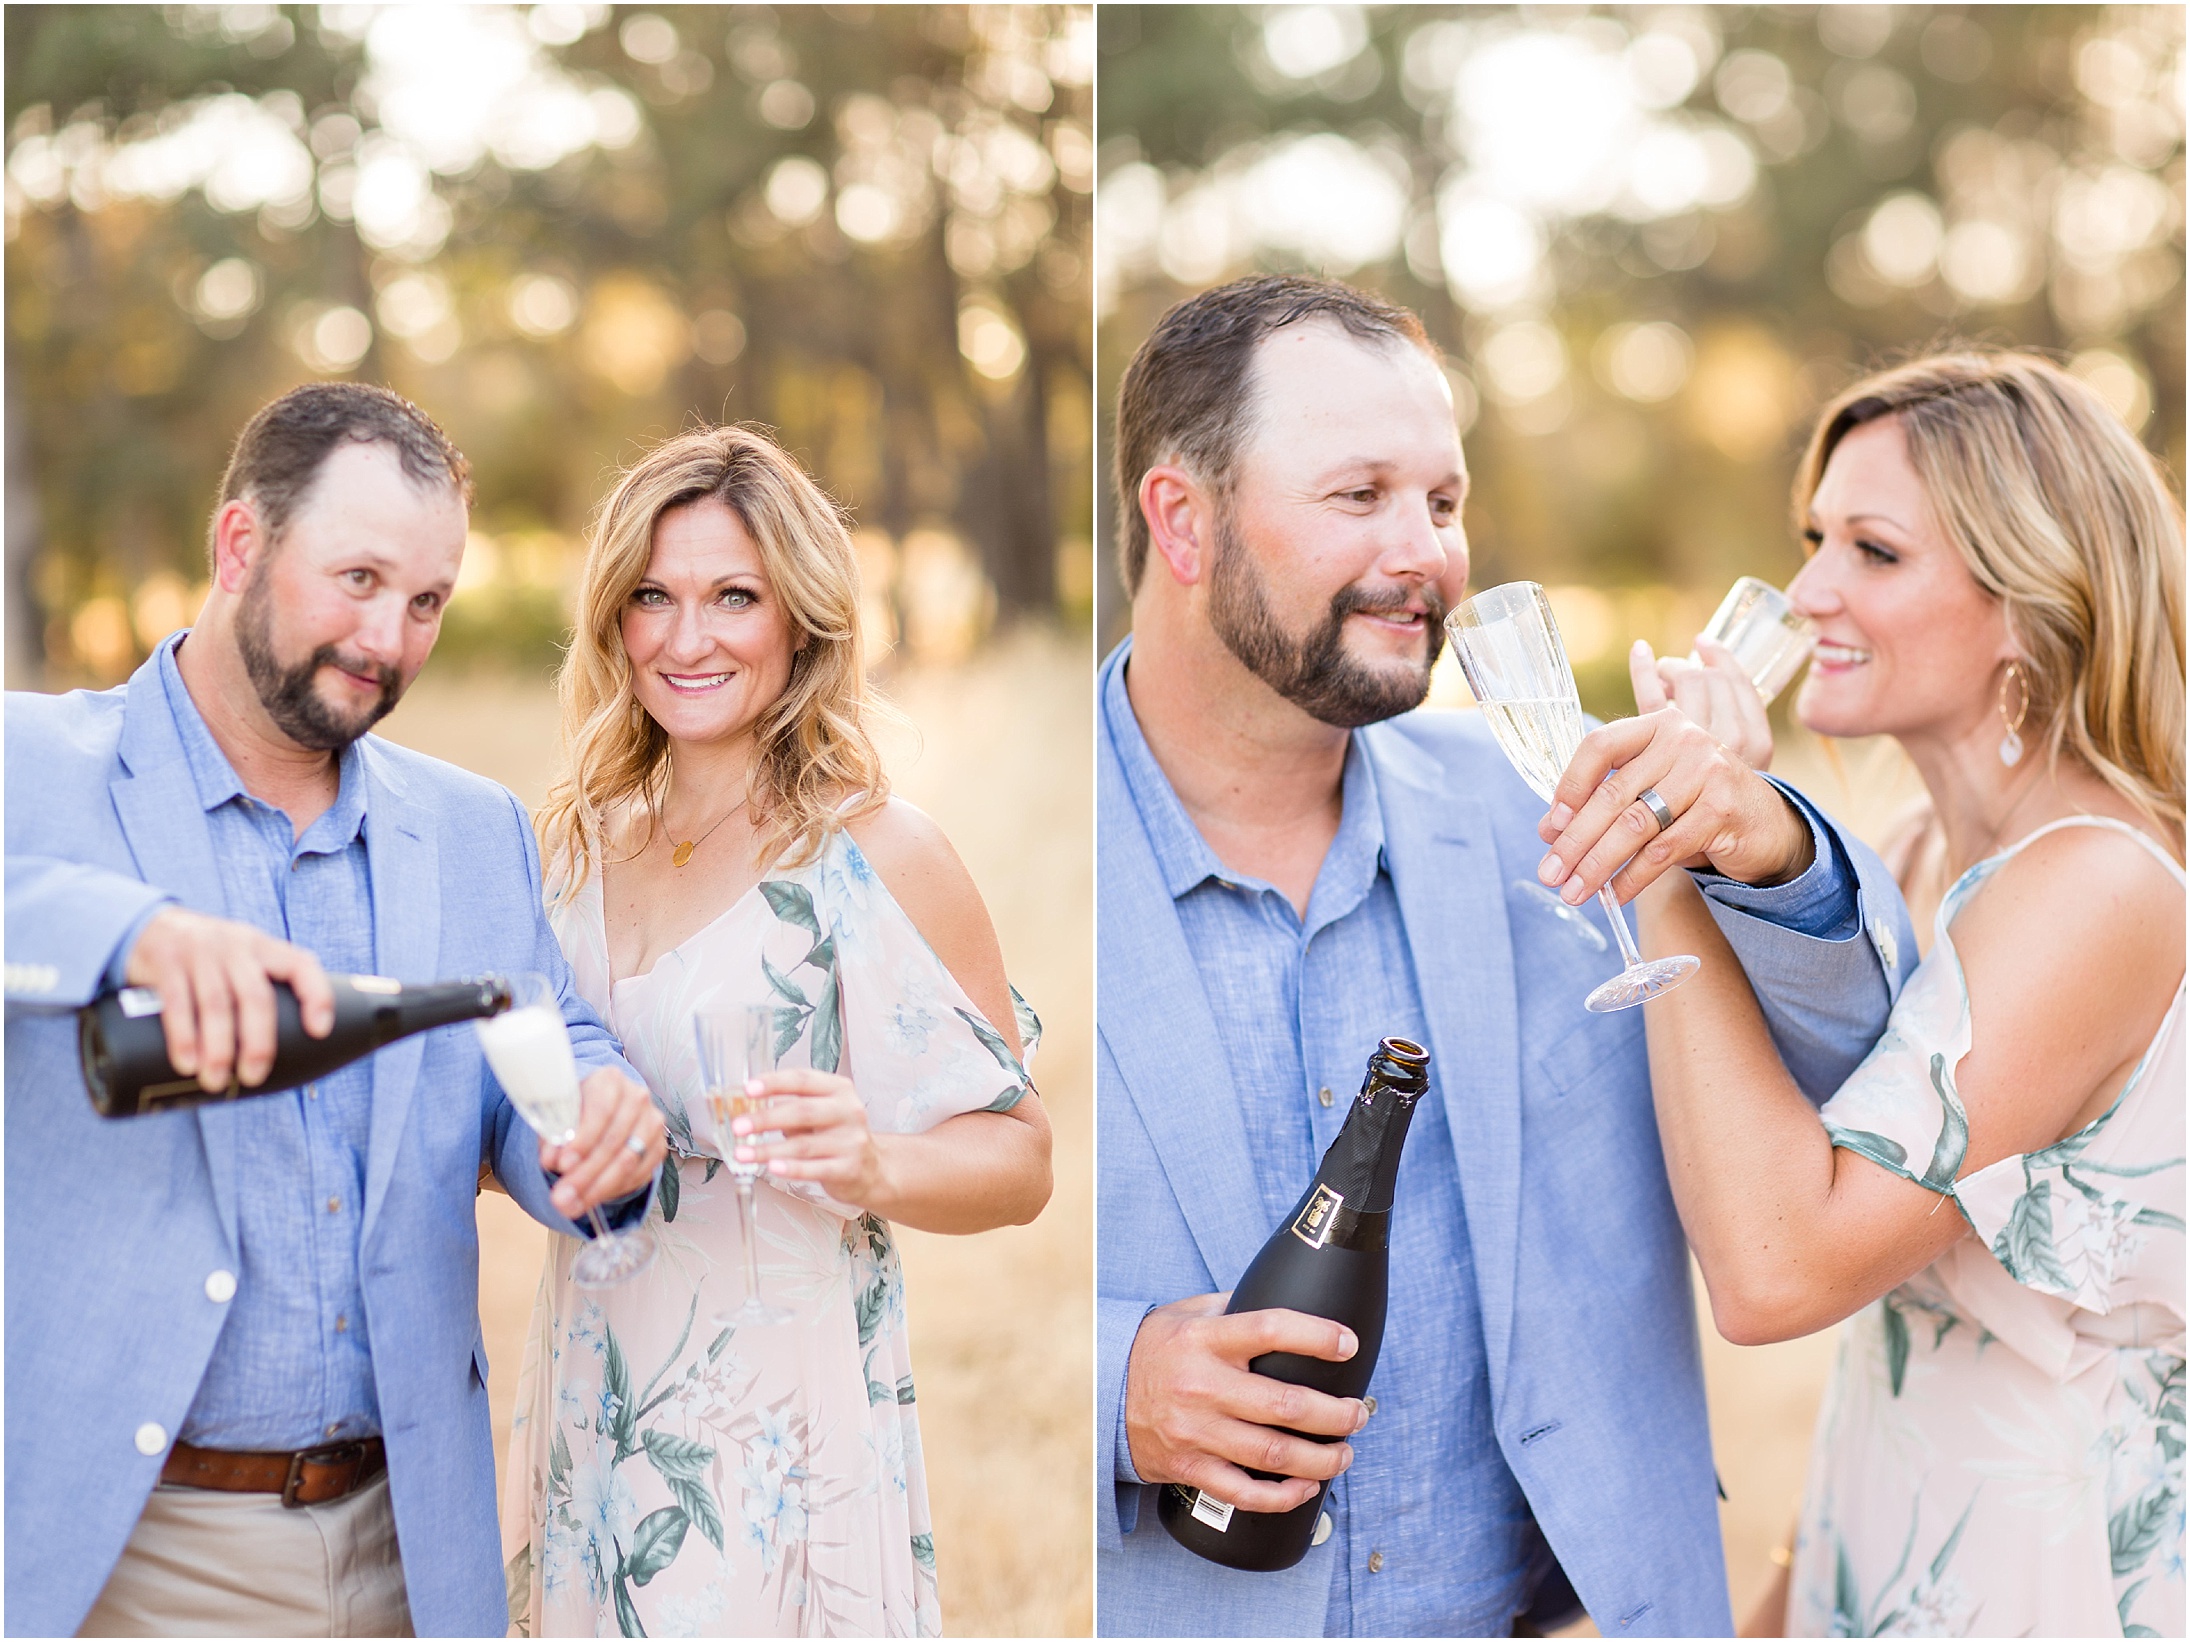 Upper Bidwell Park Twelve Year Anniversary Session Amber Enos Photography Chico California,